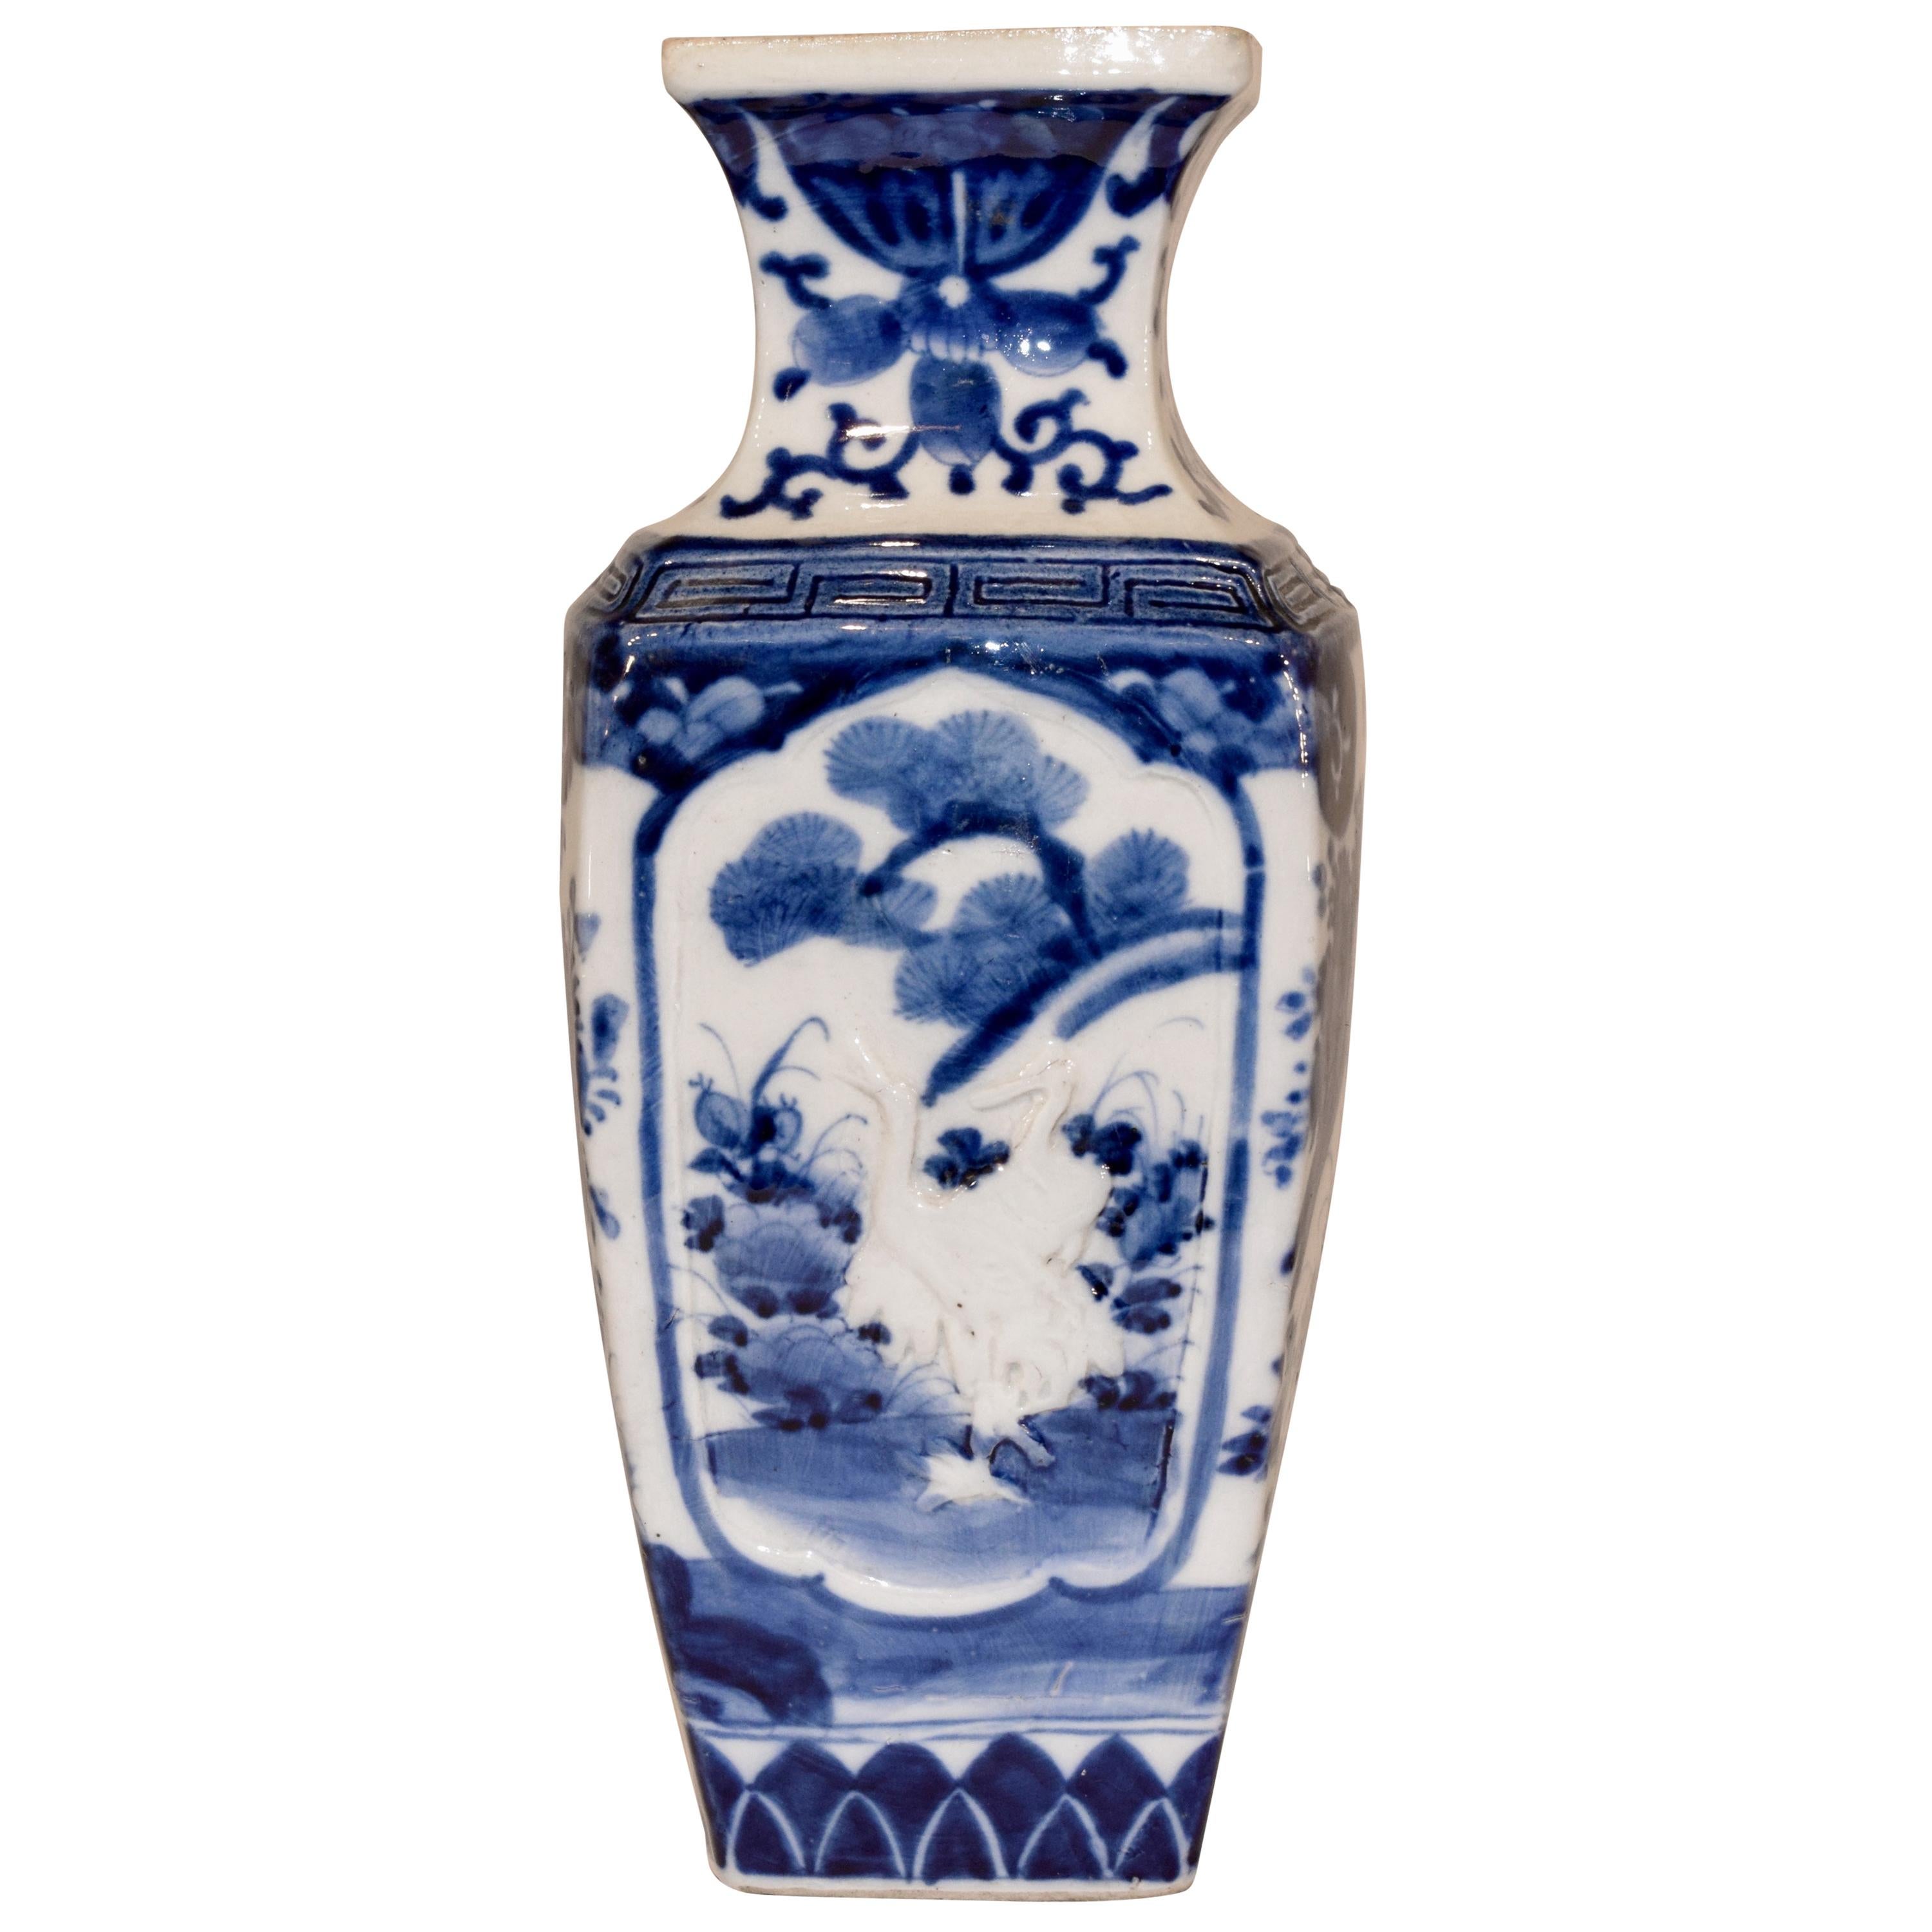 19th Century Chinese Export Vase with Birds